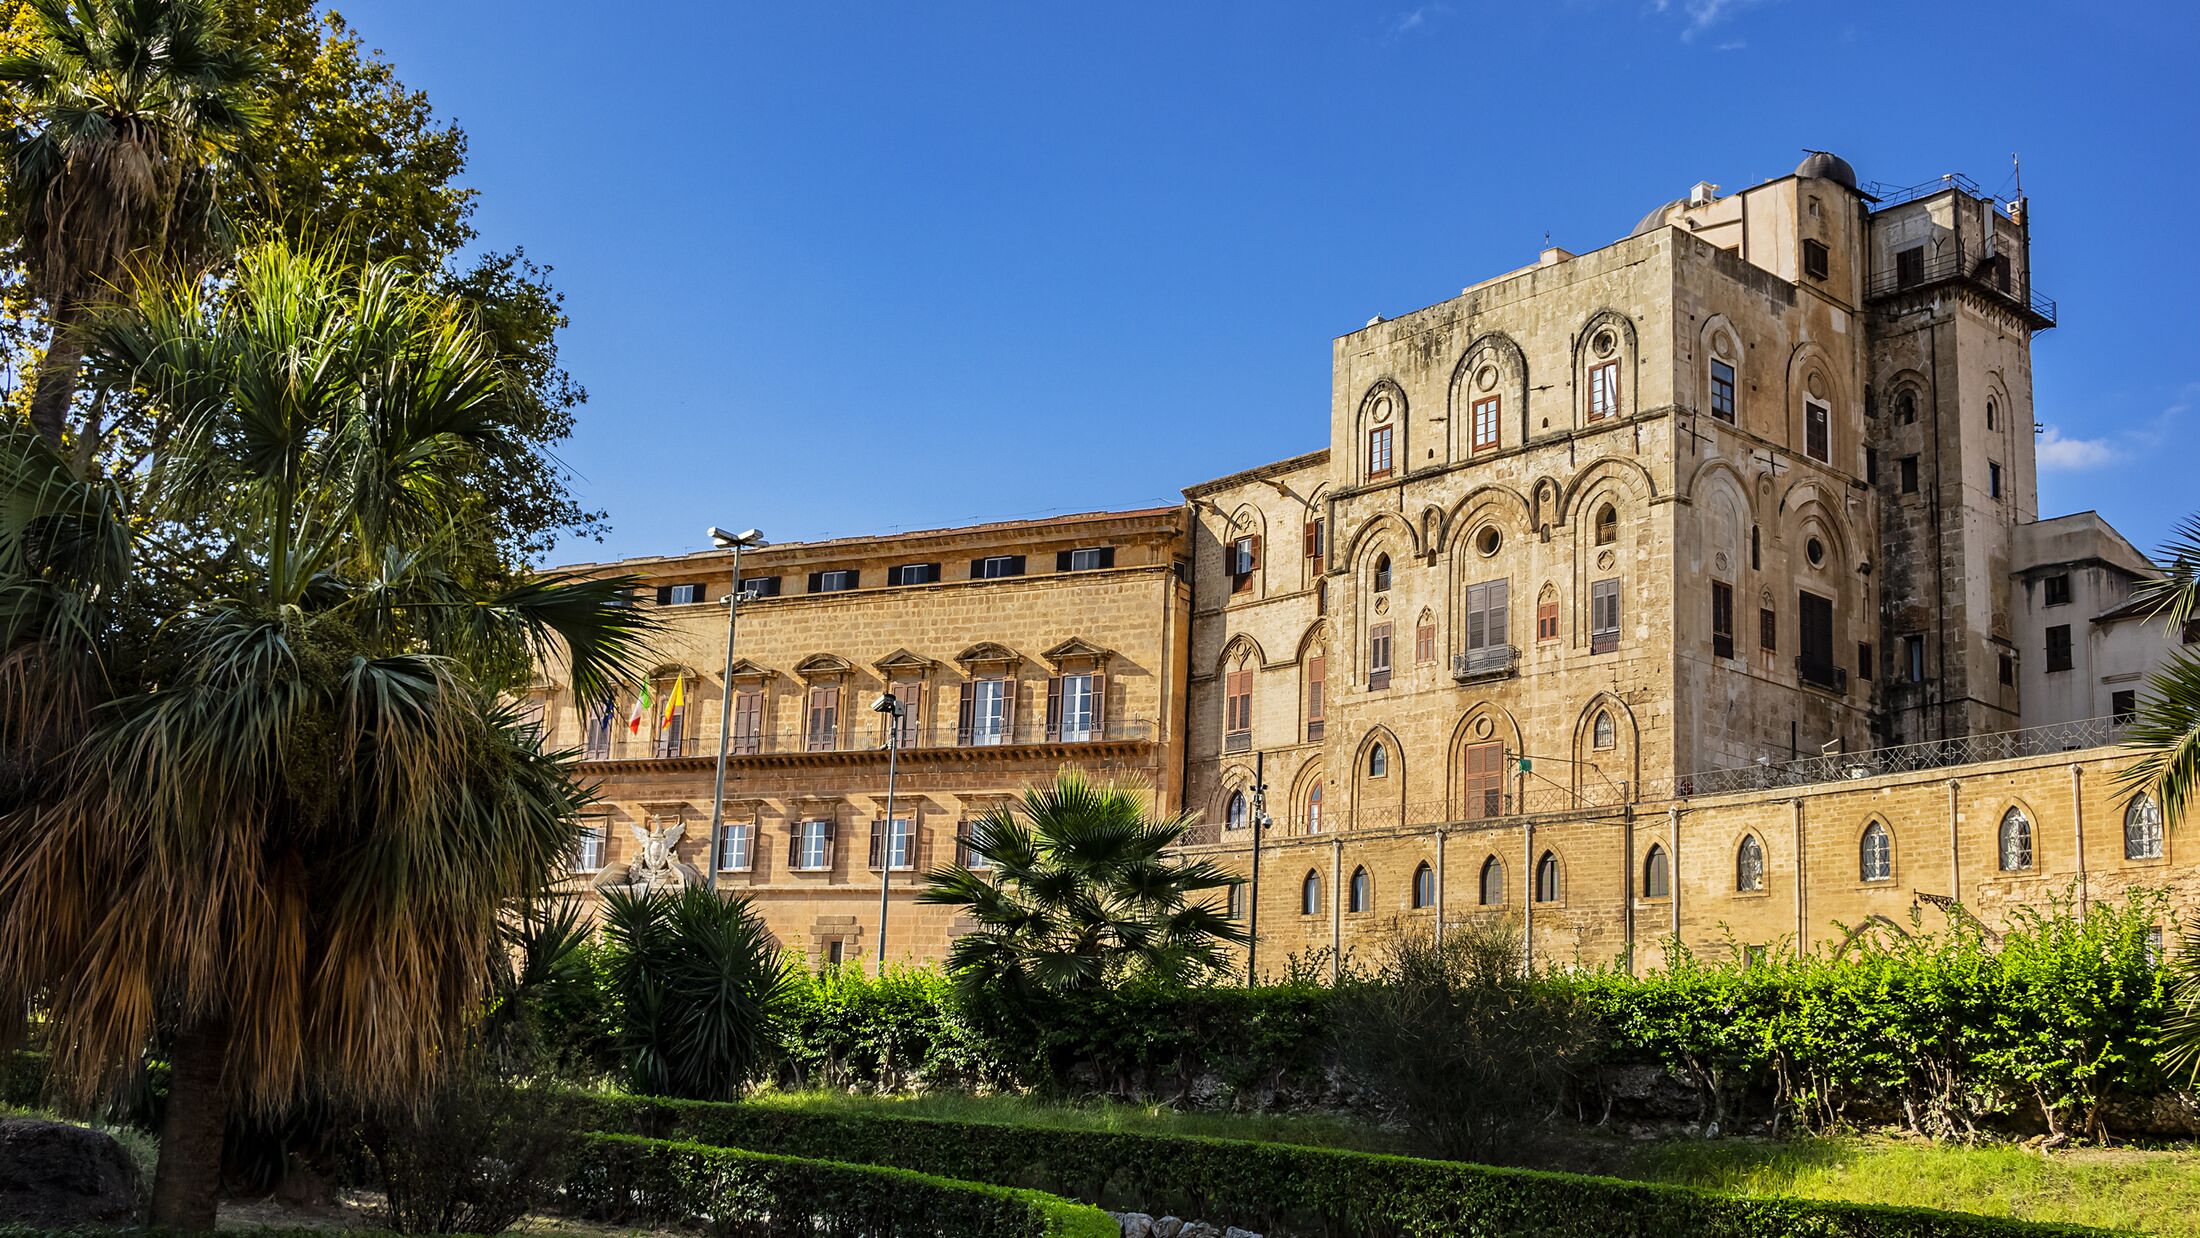 Palermo Palace of Normans (Palazzo dei Normanni) or old Royal Palace. Norman Palace - one of oldest royal palaces in Europe; it was created in IX century by Emir of Palermo. Palermo, Sicily, Italy.